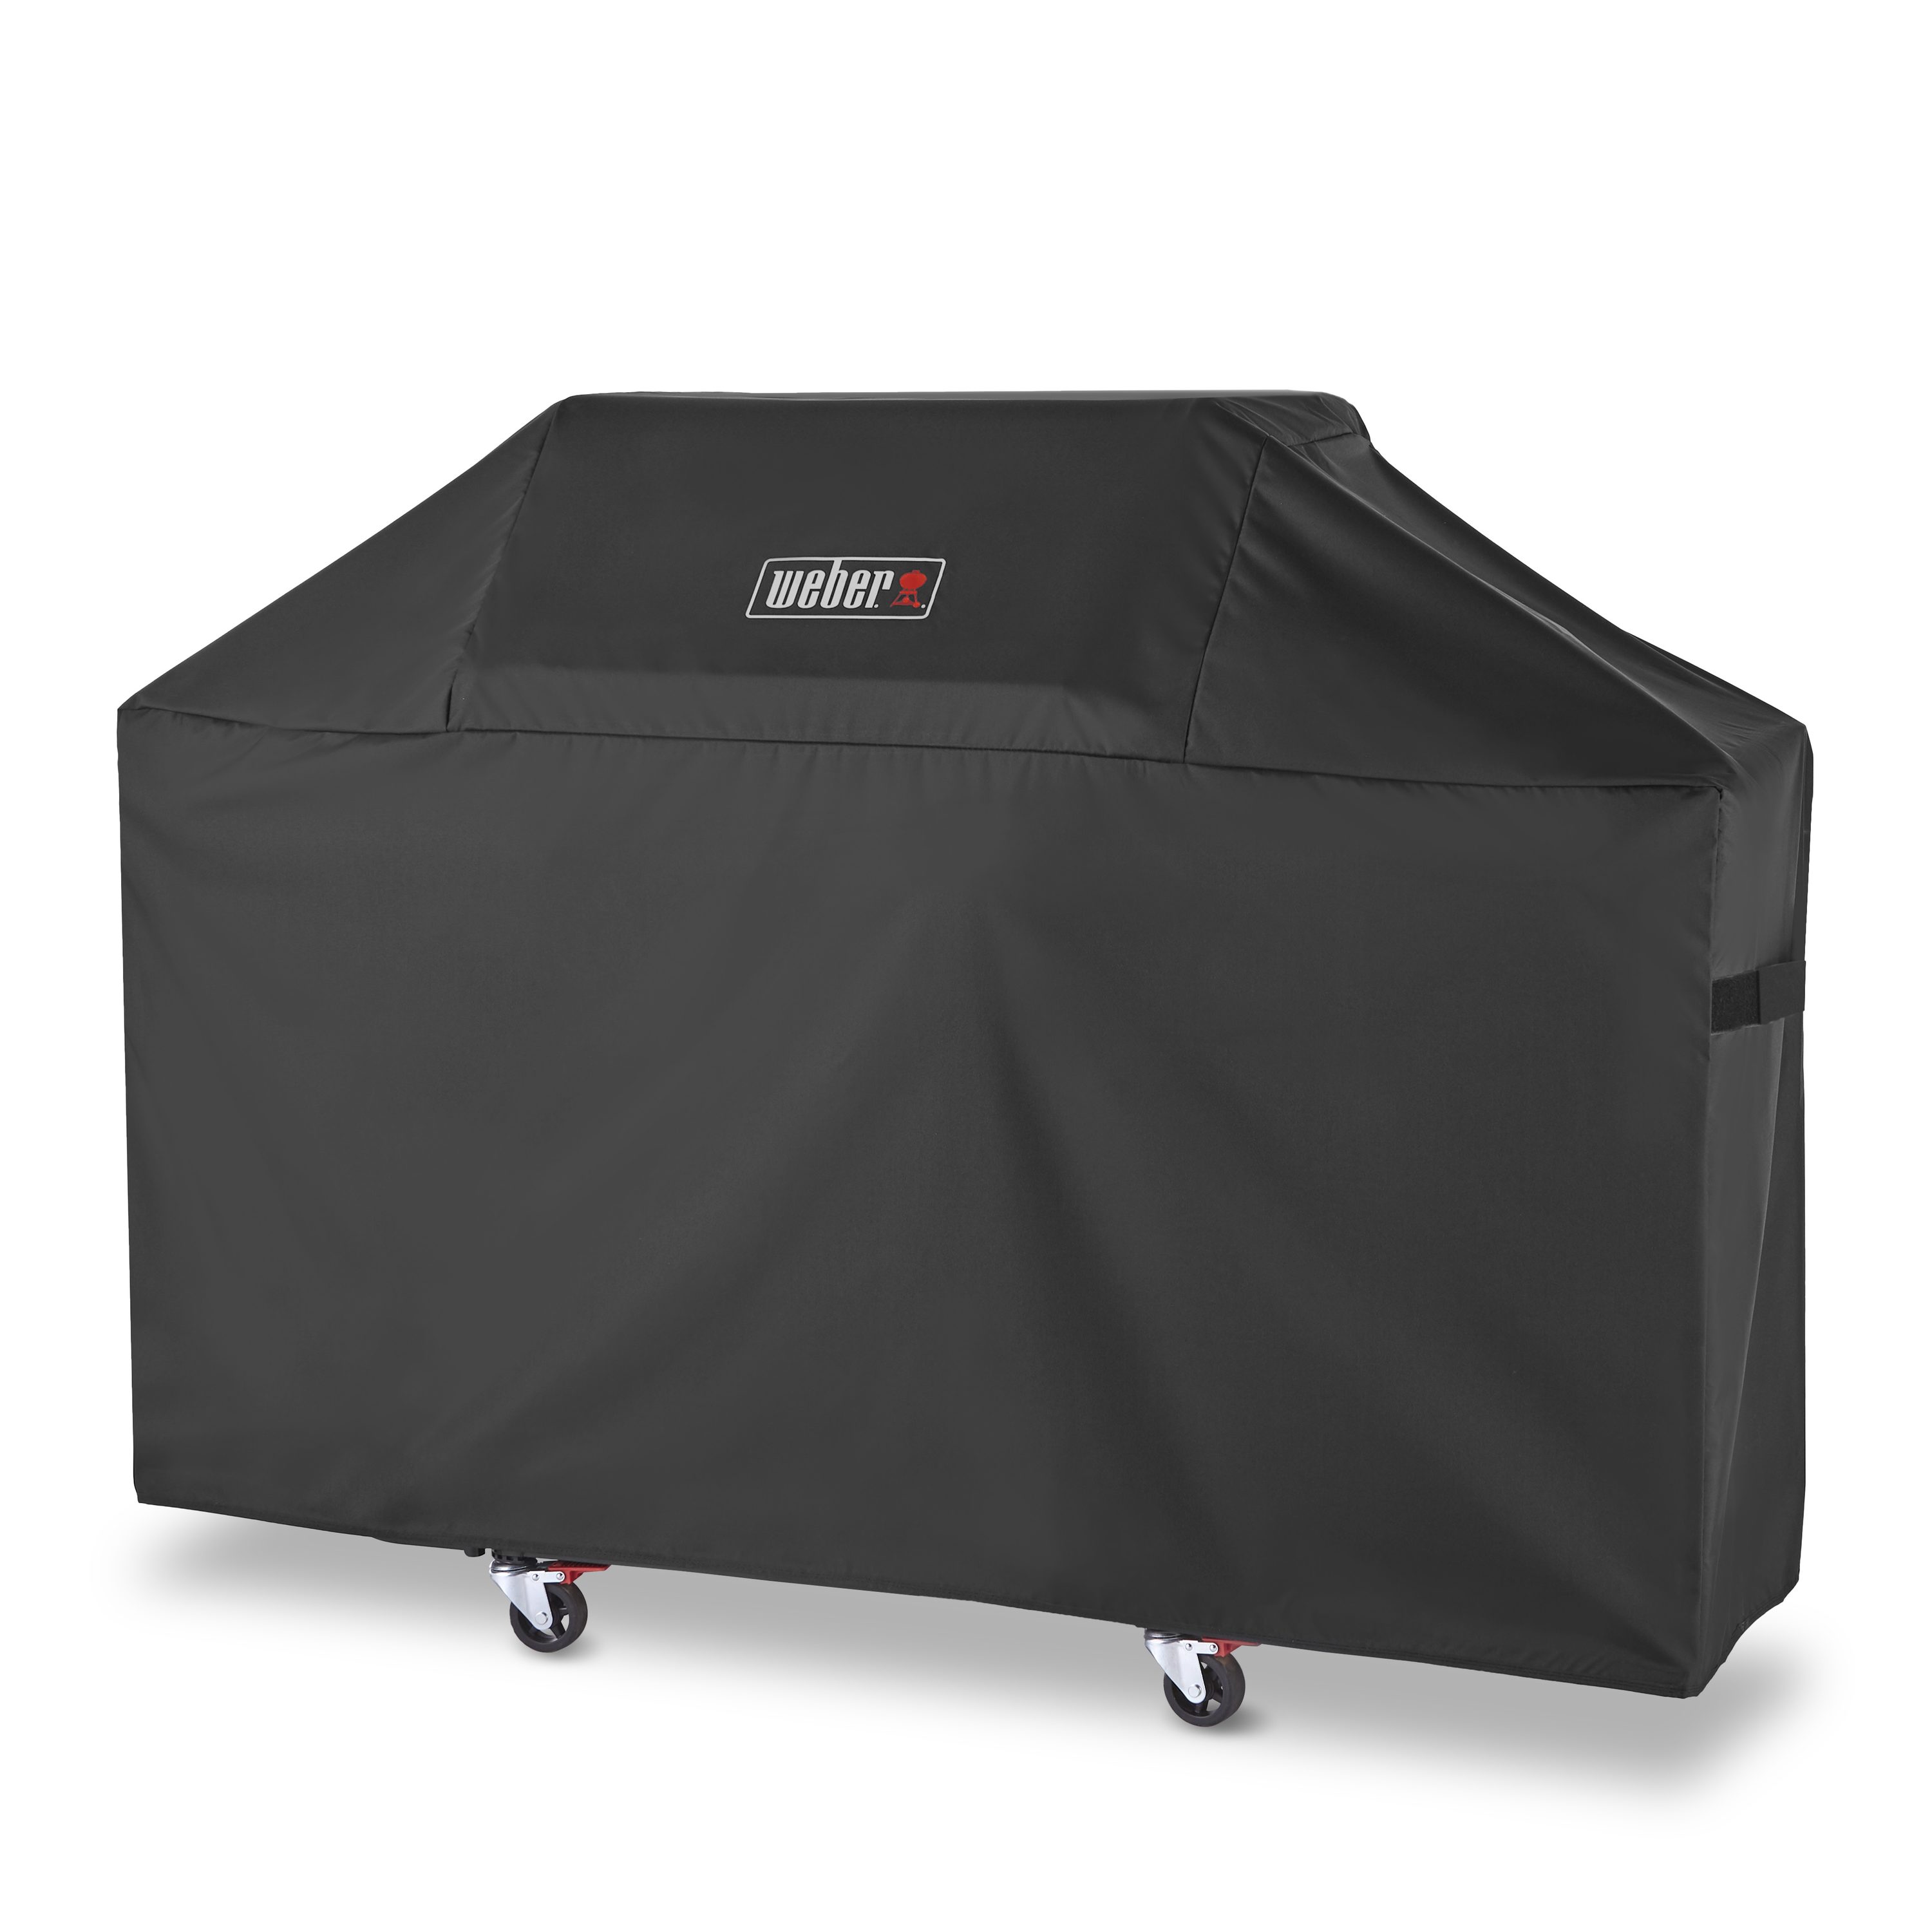 Lover og forskrifter Planet mekanisme Weber Genesis 300 63-in W x 43.4-in H Black Gas Grill Cover in the Grill  Covers department at Lowes.com